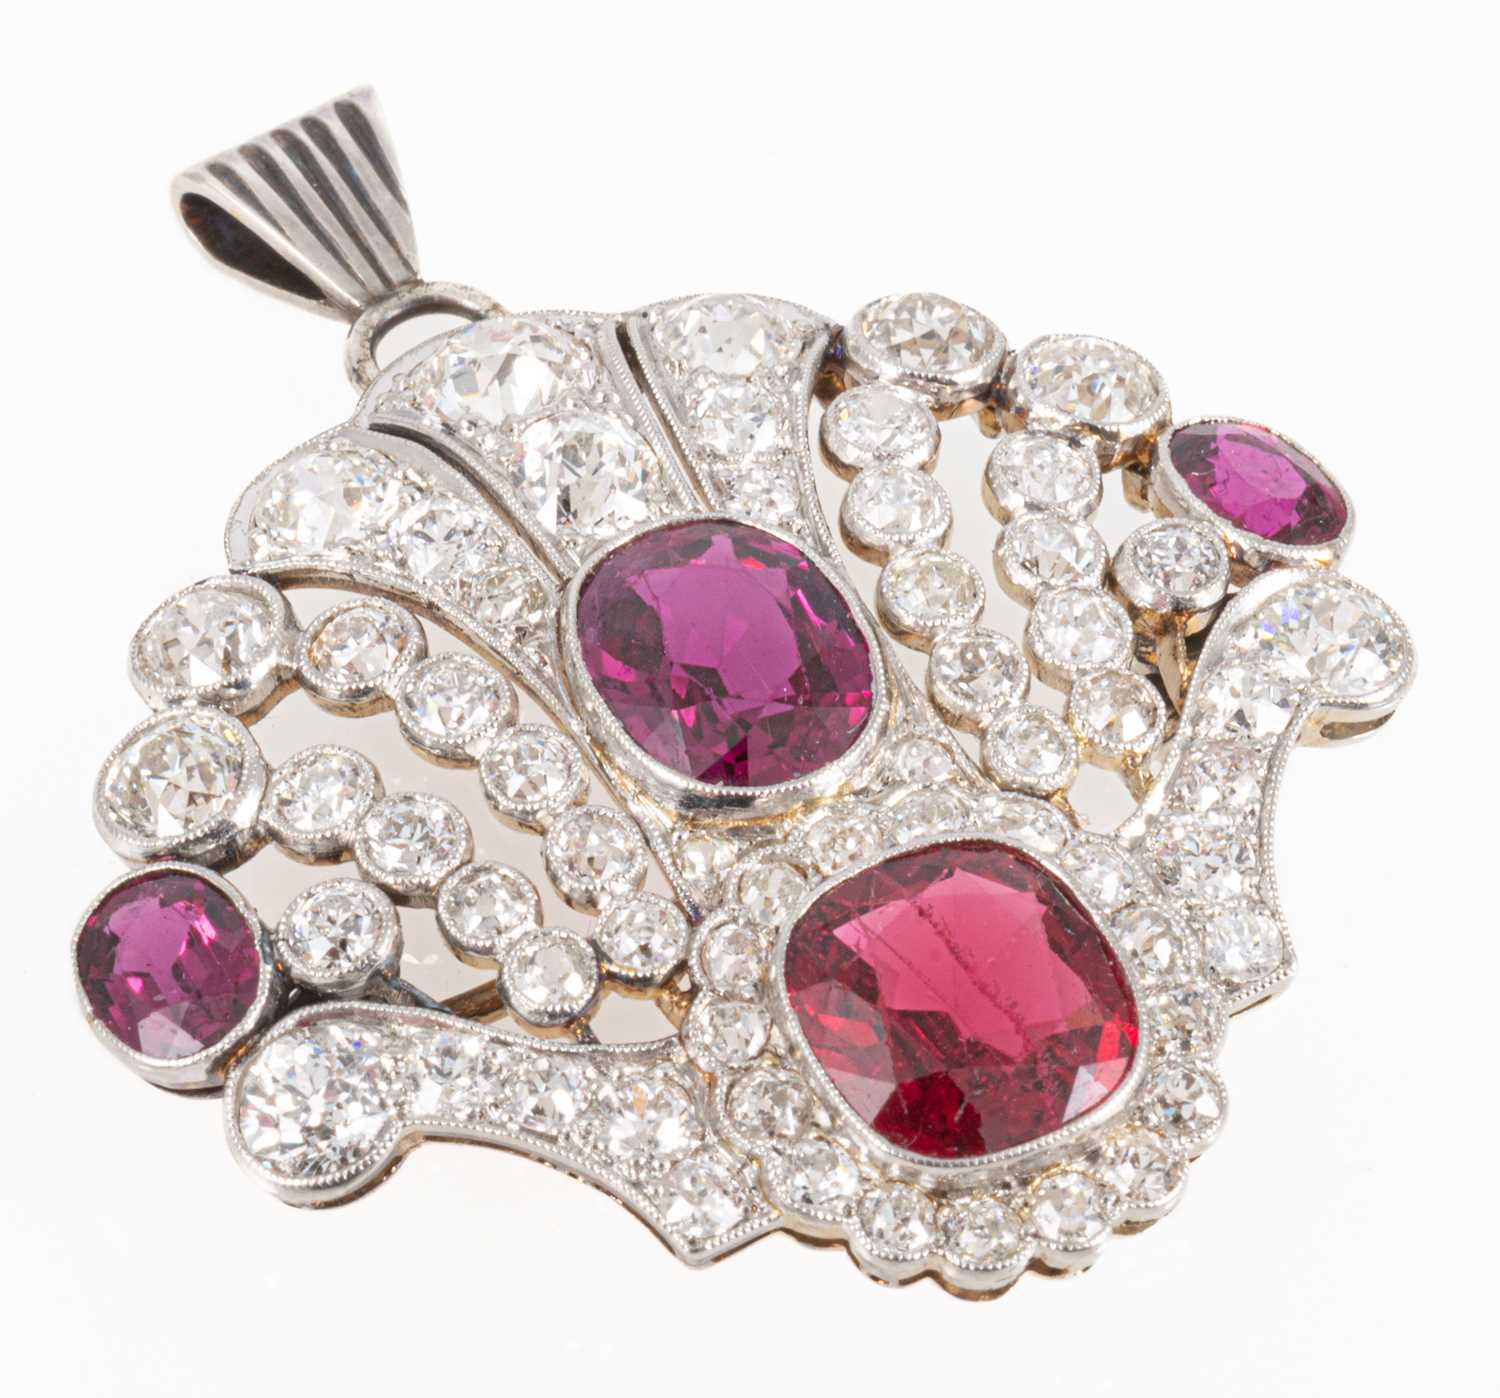 87 - An Edwardian style ruby, red spinel and diamond brooch/pendant.